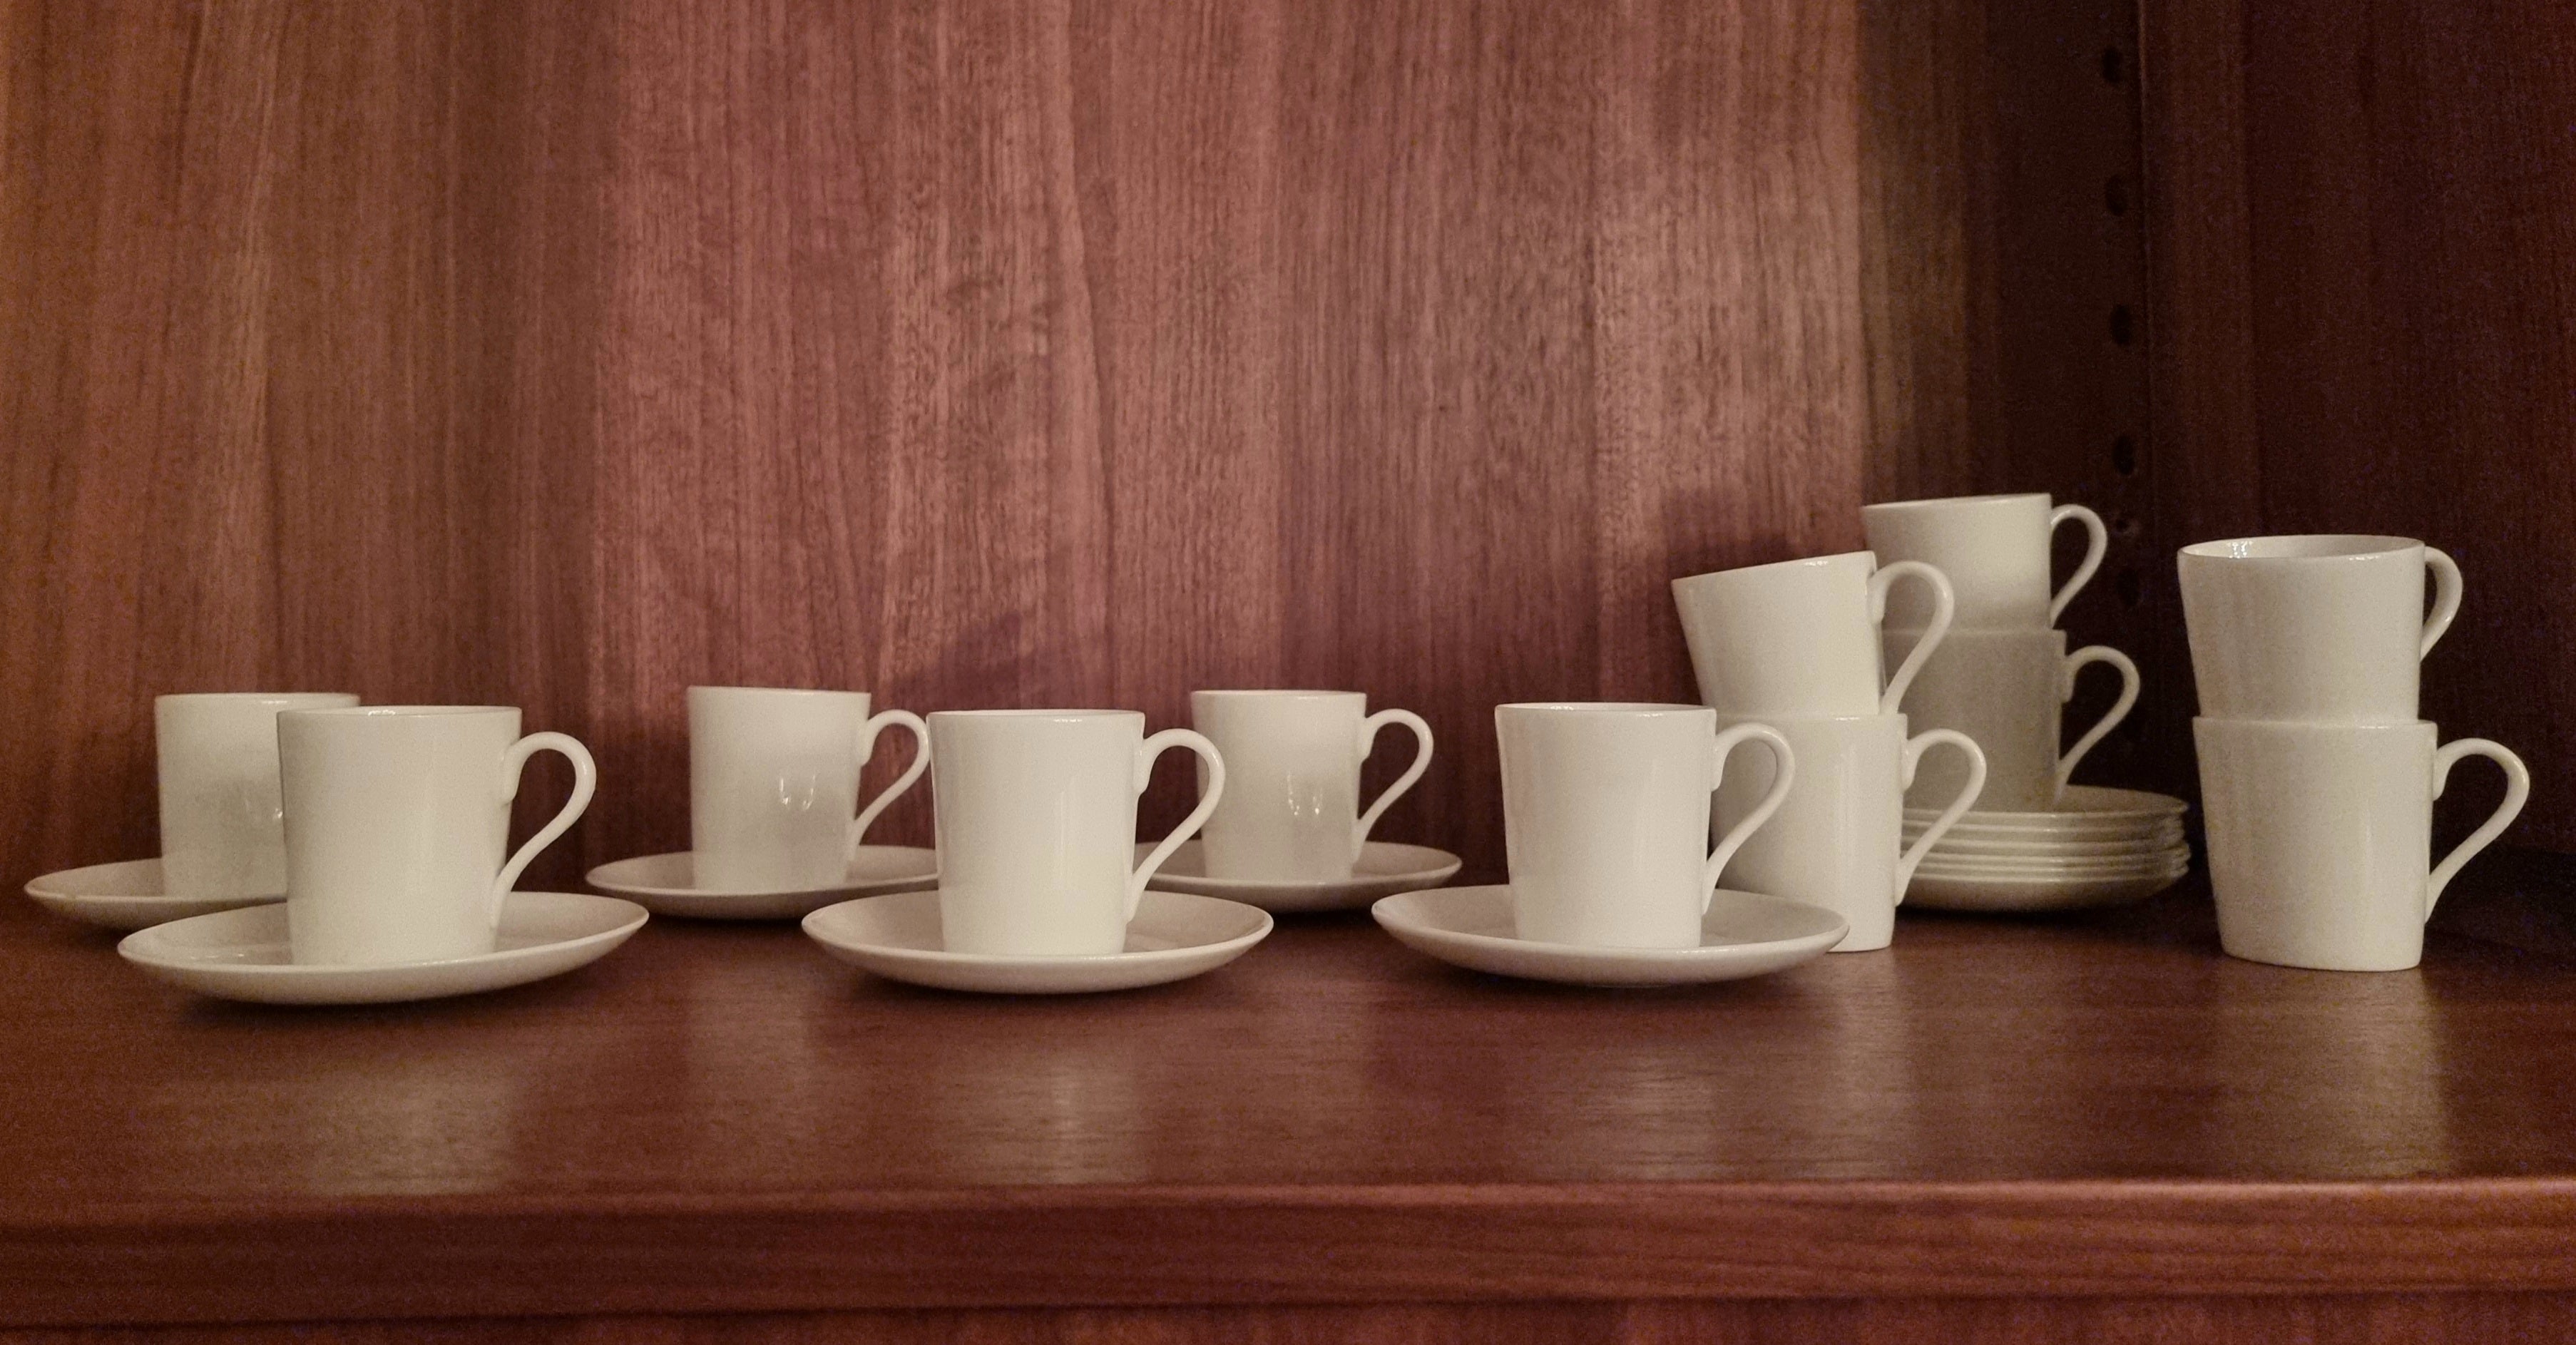 A rare beautiful espresso set 10 cups + 10 saucers + 4 pieces  (ten in good condition, four with smaller dents, one with dents and smaller crack). Designed by Stig Lindberg (1916-1982), swedish artist and industrial designer. Artistic leader at